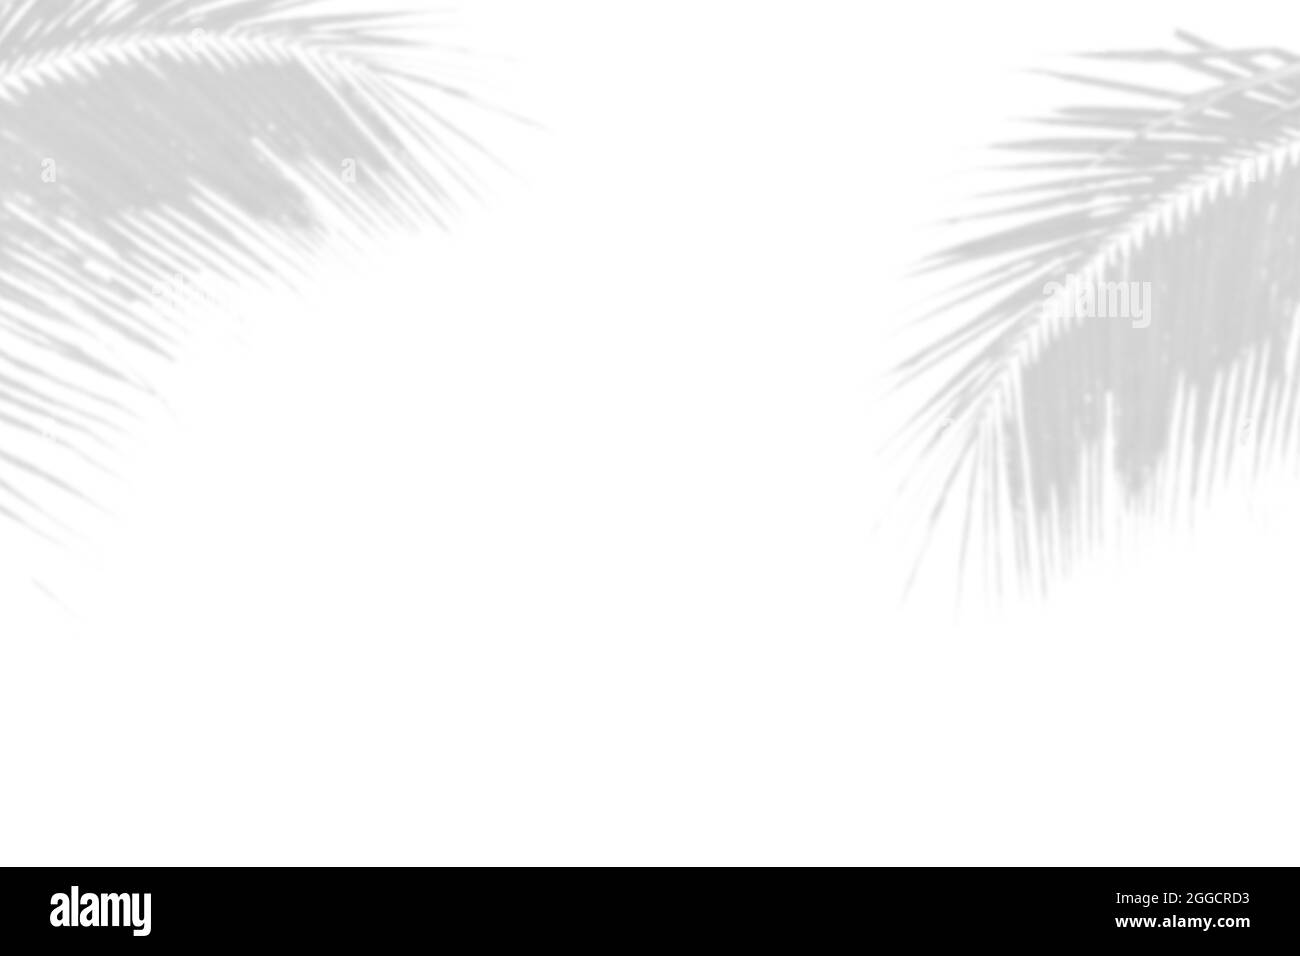 Gray shadow of nature palm leaves on white background. Abstract monochrome of coconut palm leaf. Stock Photo